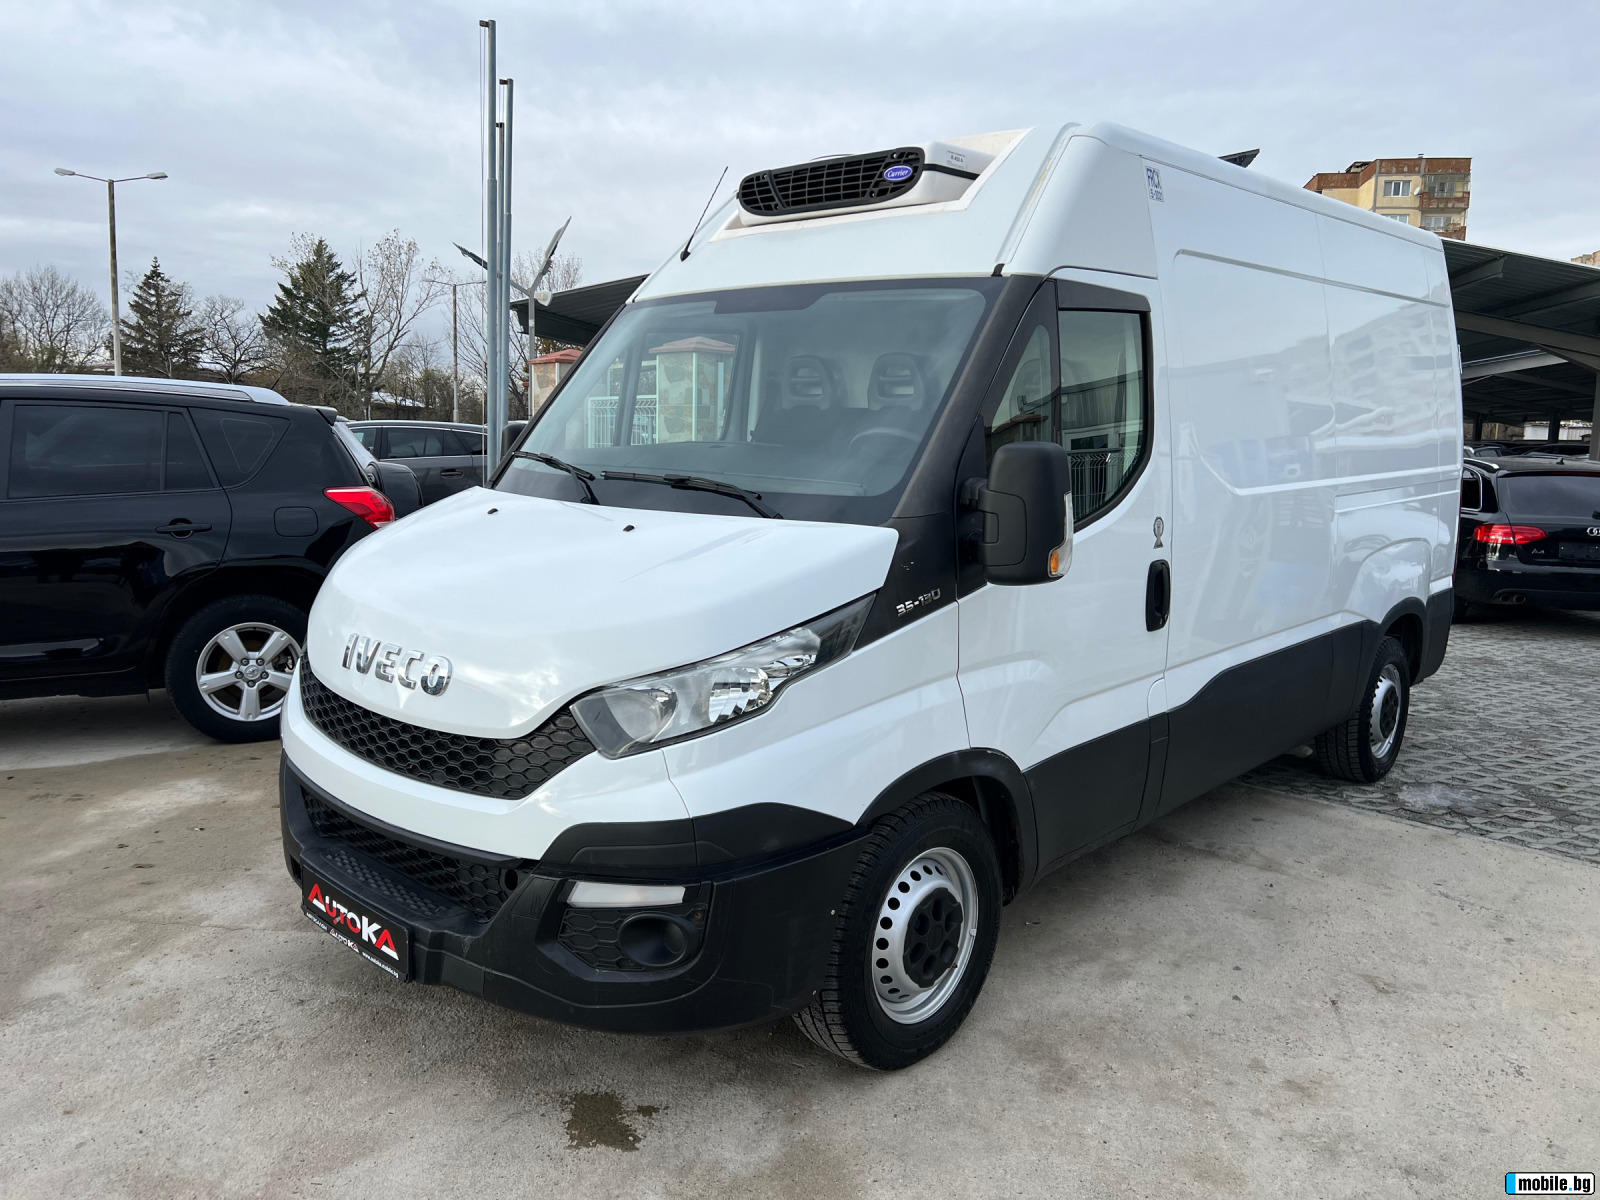 Iveco 35s13 DAILY=  -20+ 30= 6= 2.3HDI-126 | Mobile.bg   6